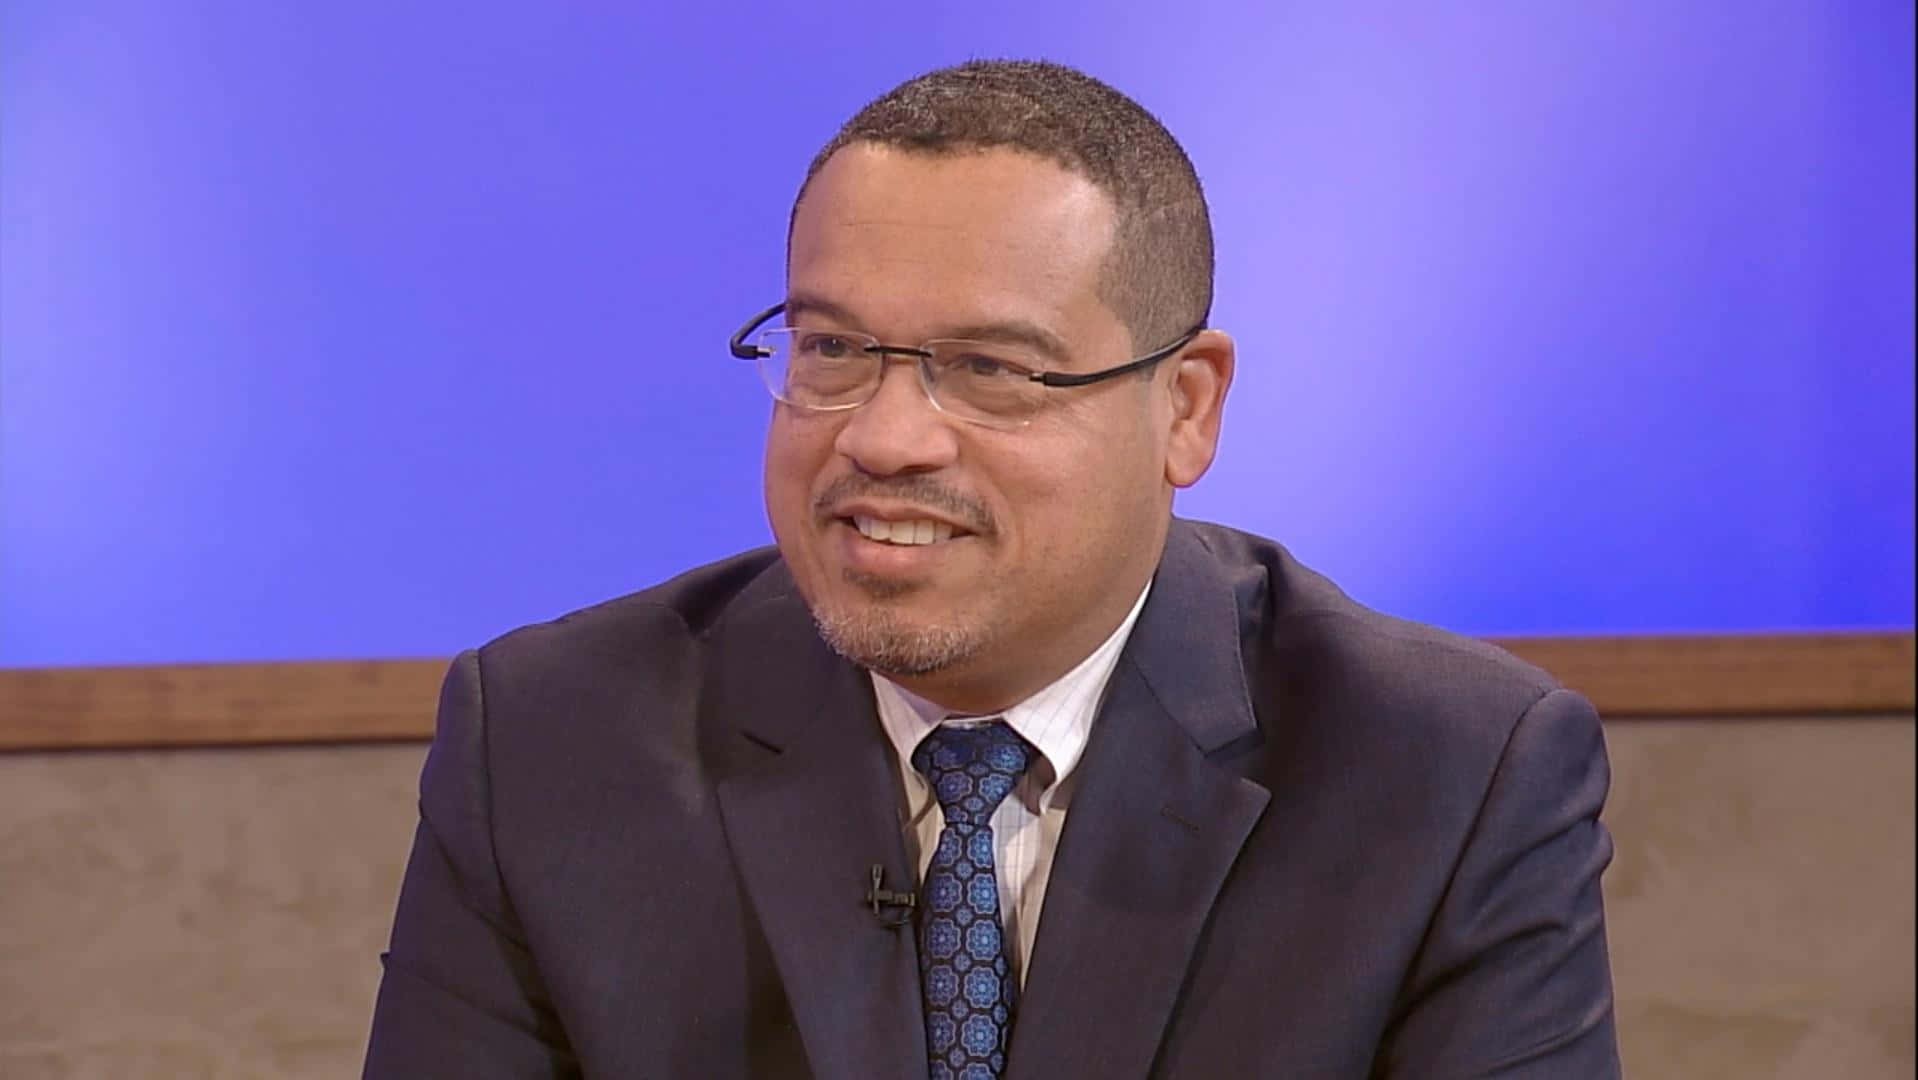 Keith Ellison In Blue And Brown Wall Wallpaper